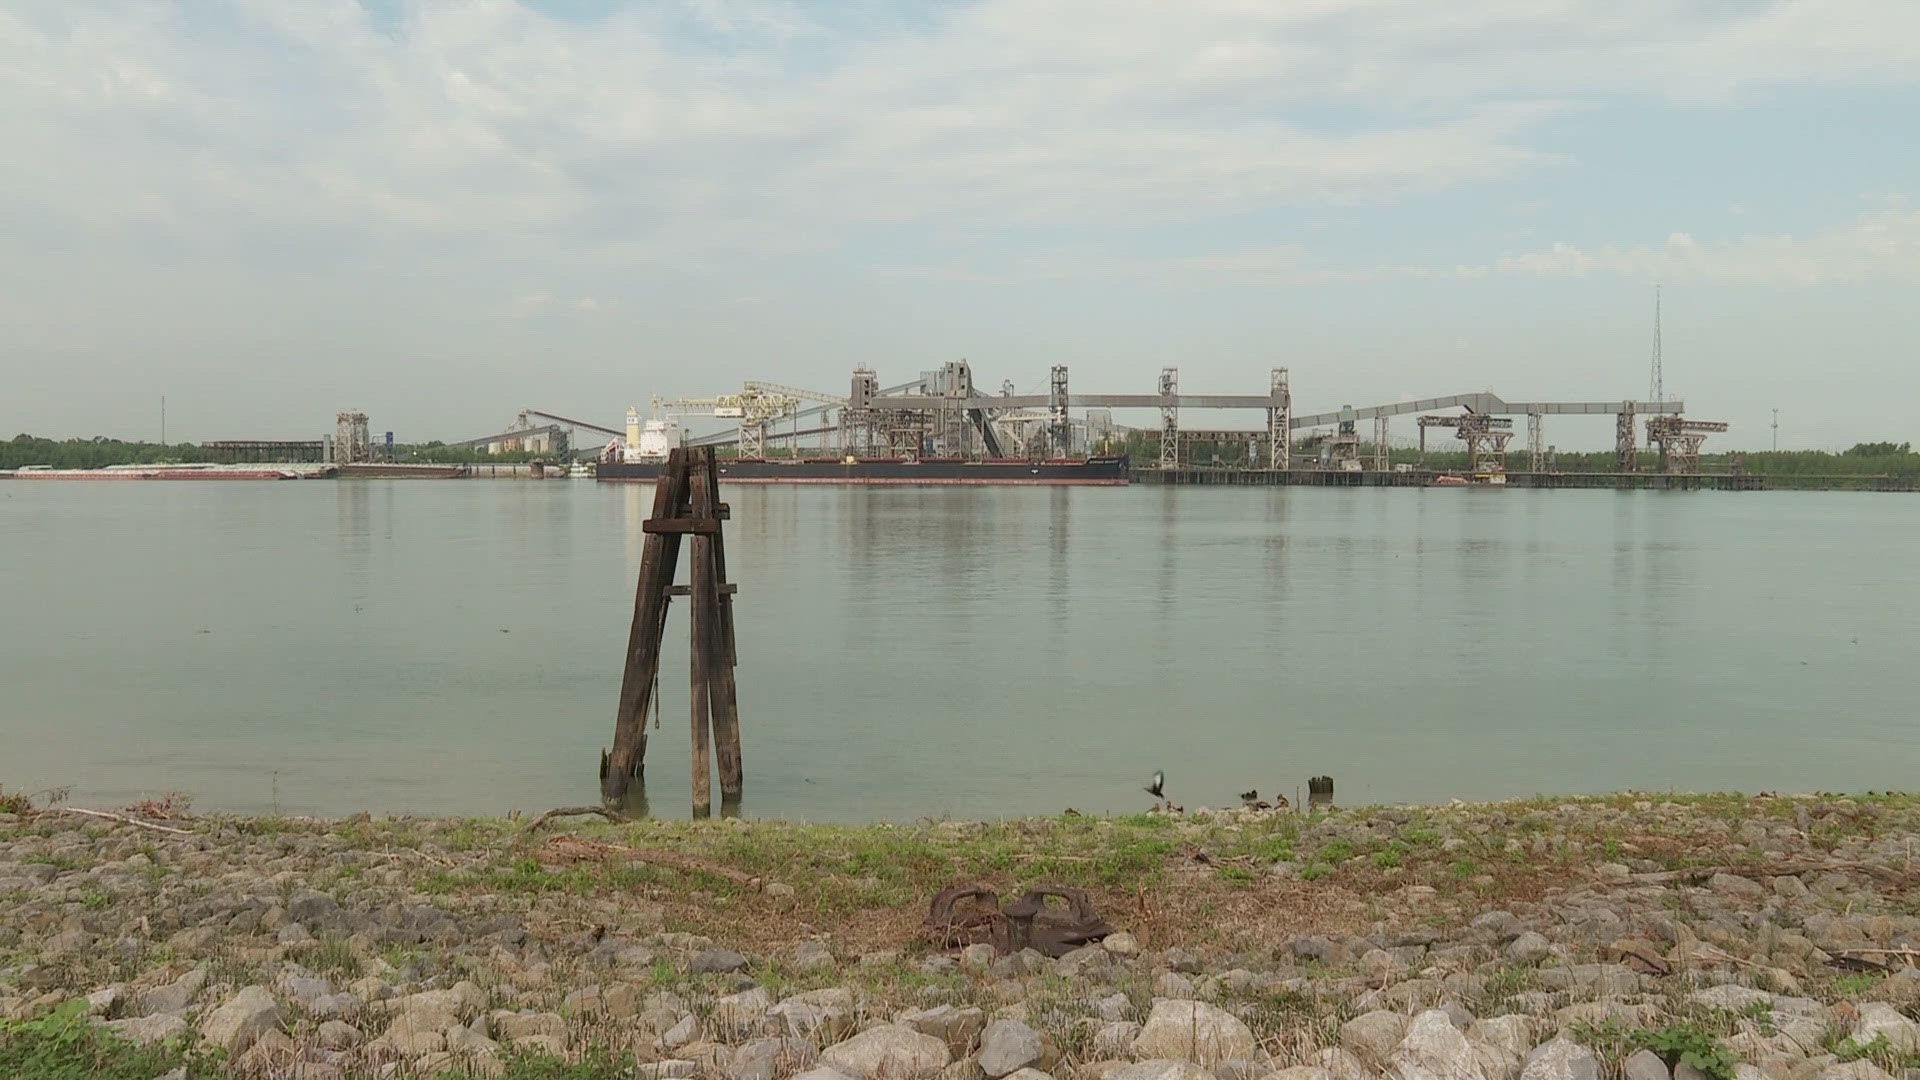 Federal, state, and local officials are working on plans of action to use dredging to raise the sill 20 feet while not affecting ship commerce.